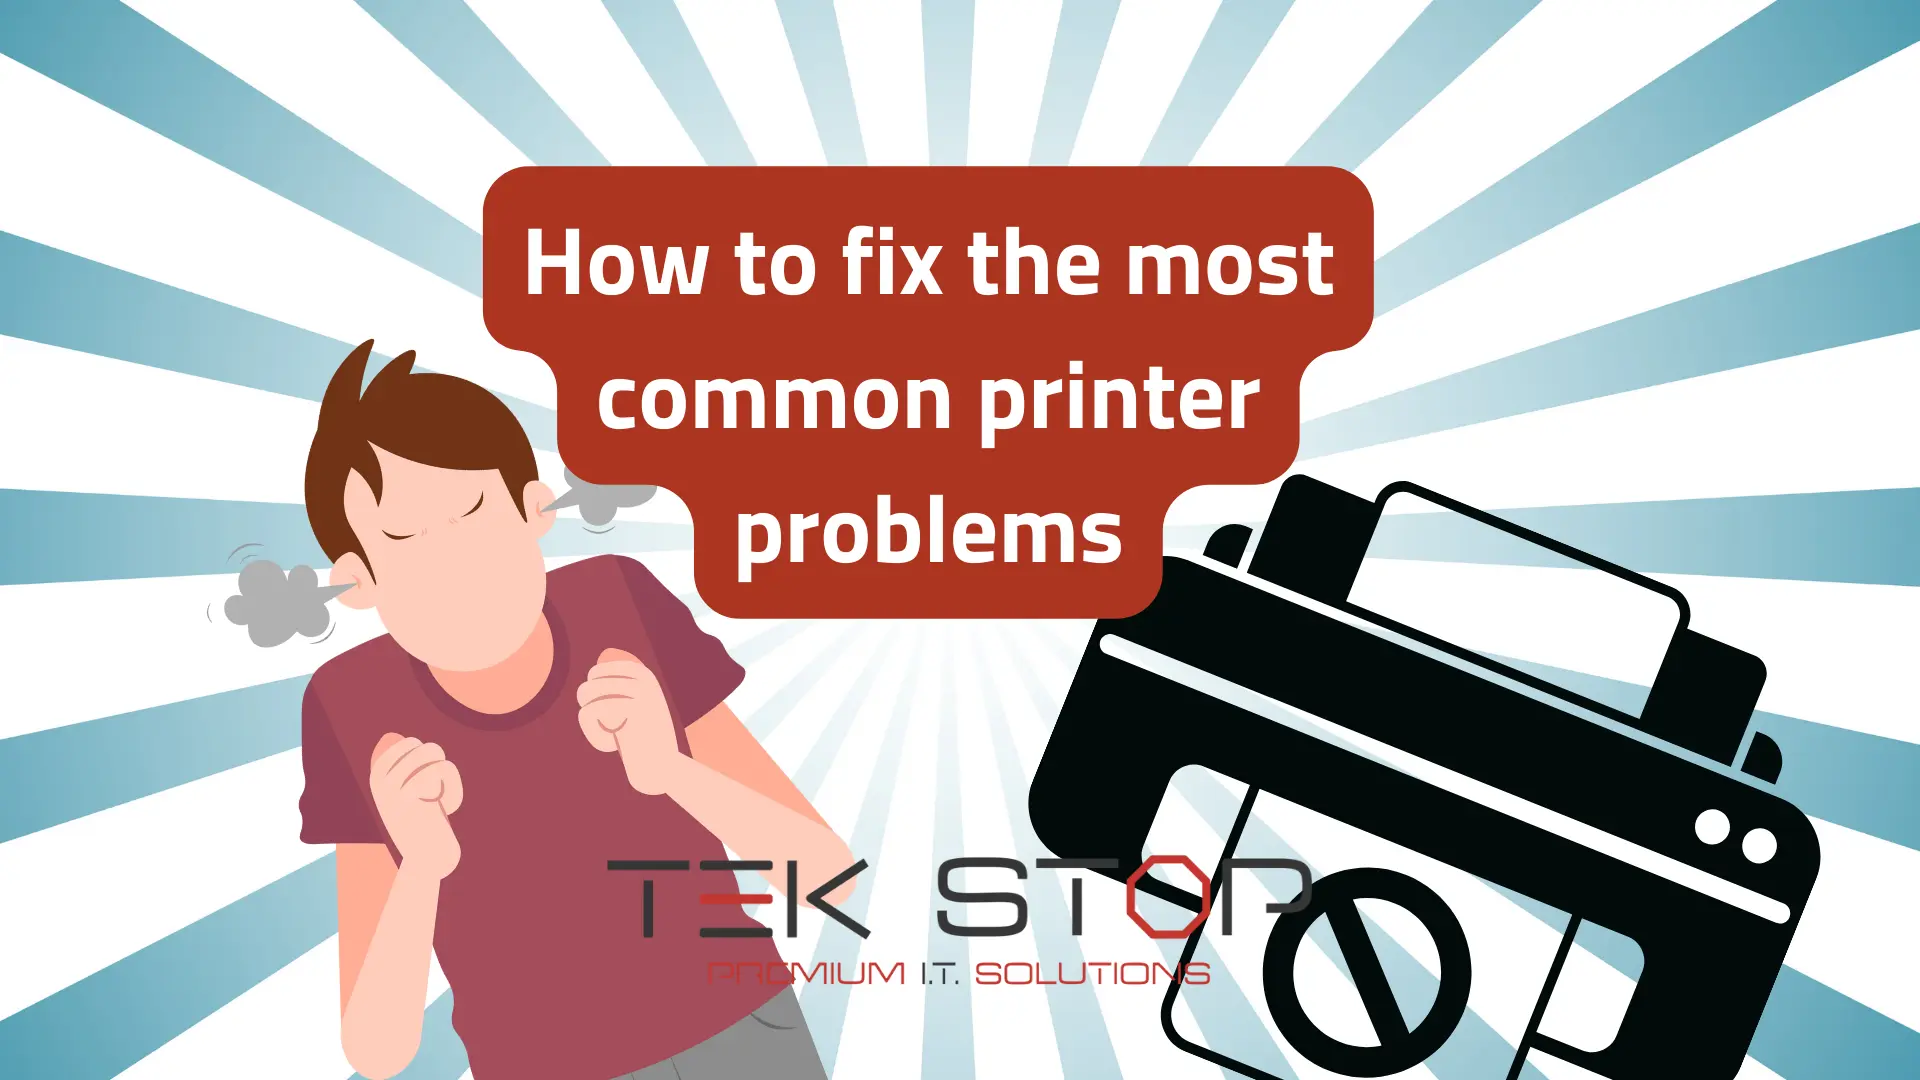 How to fix the most common printer problems